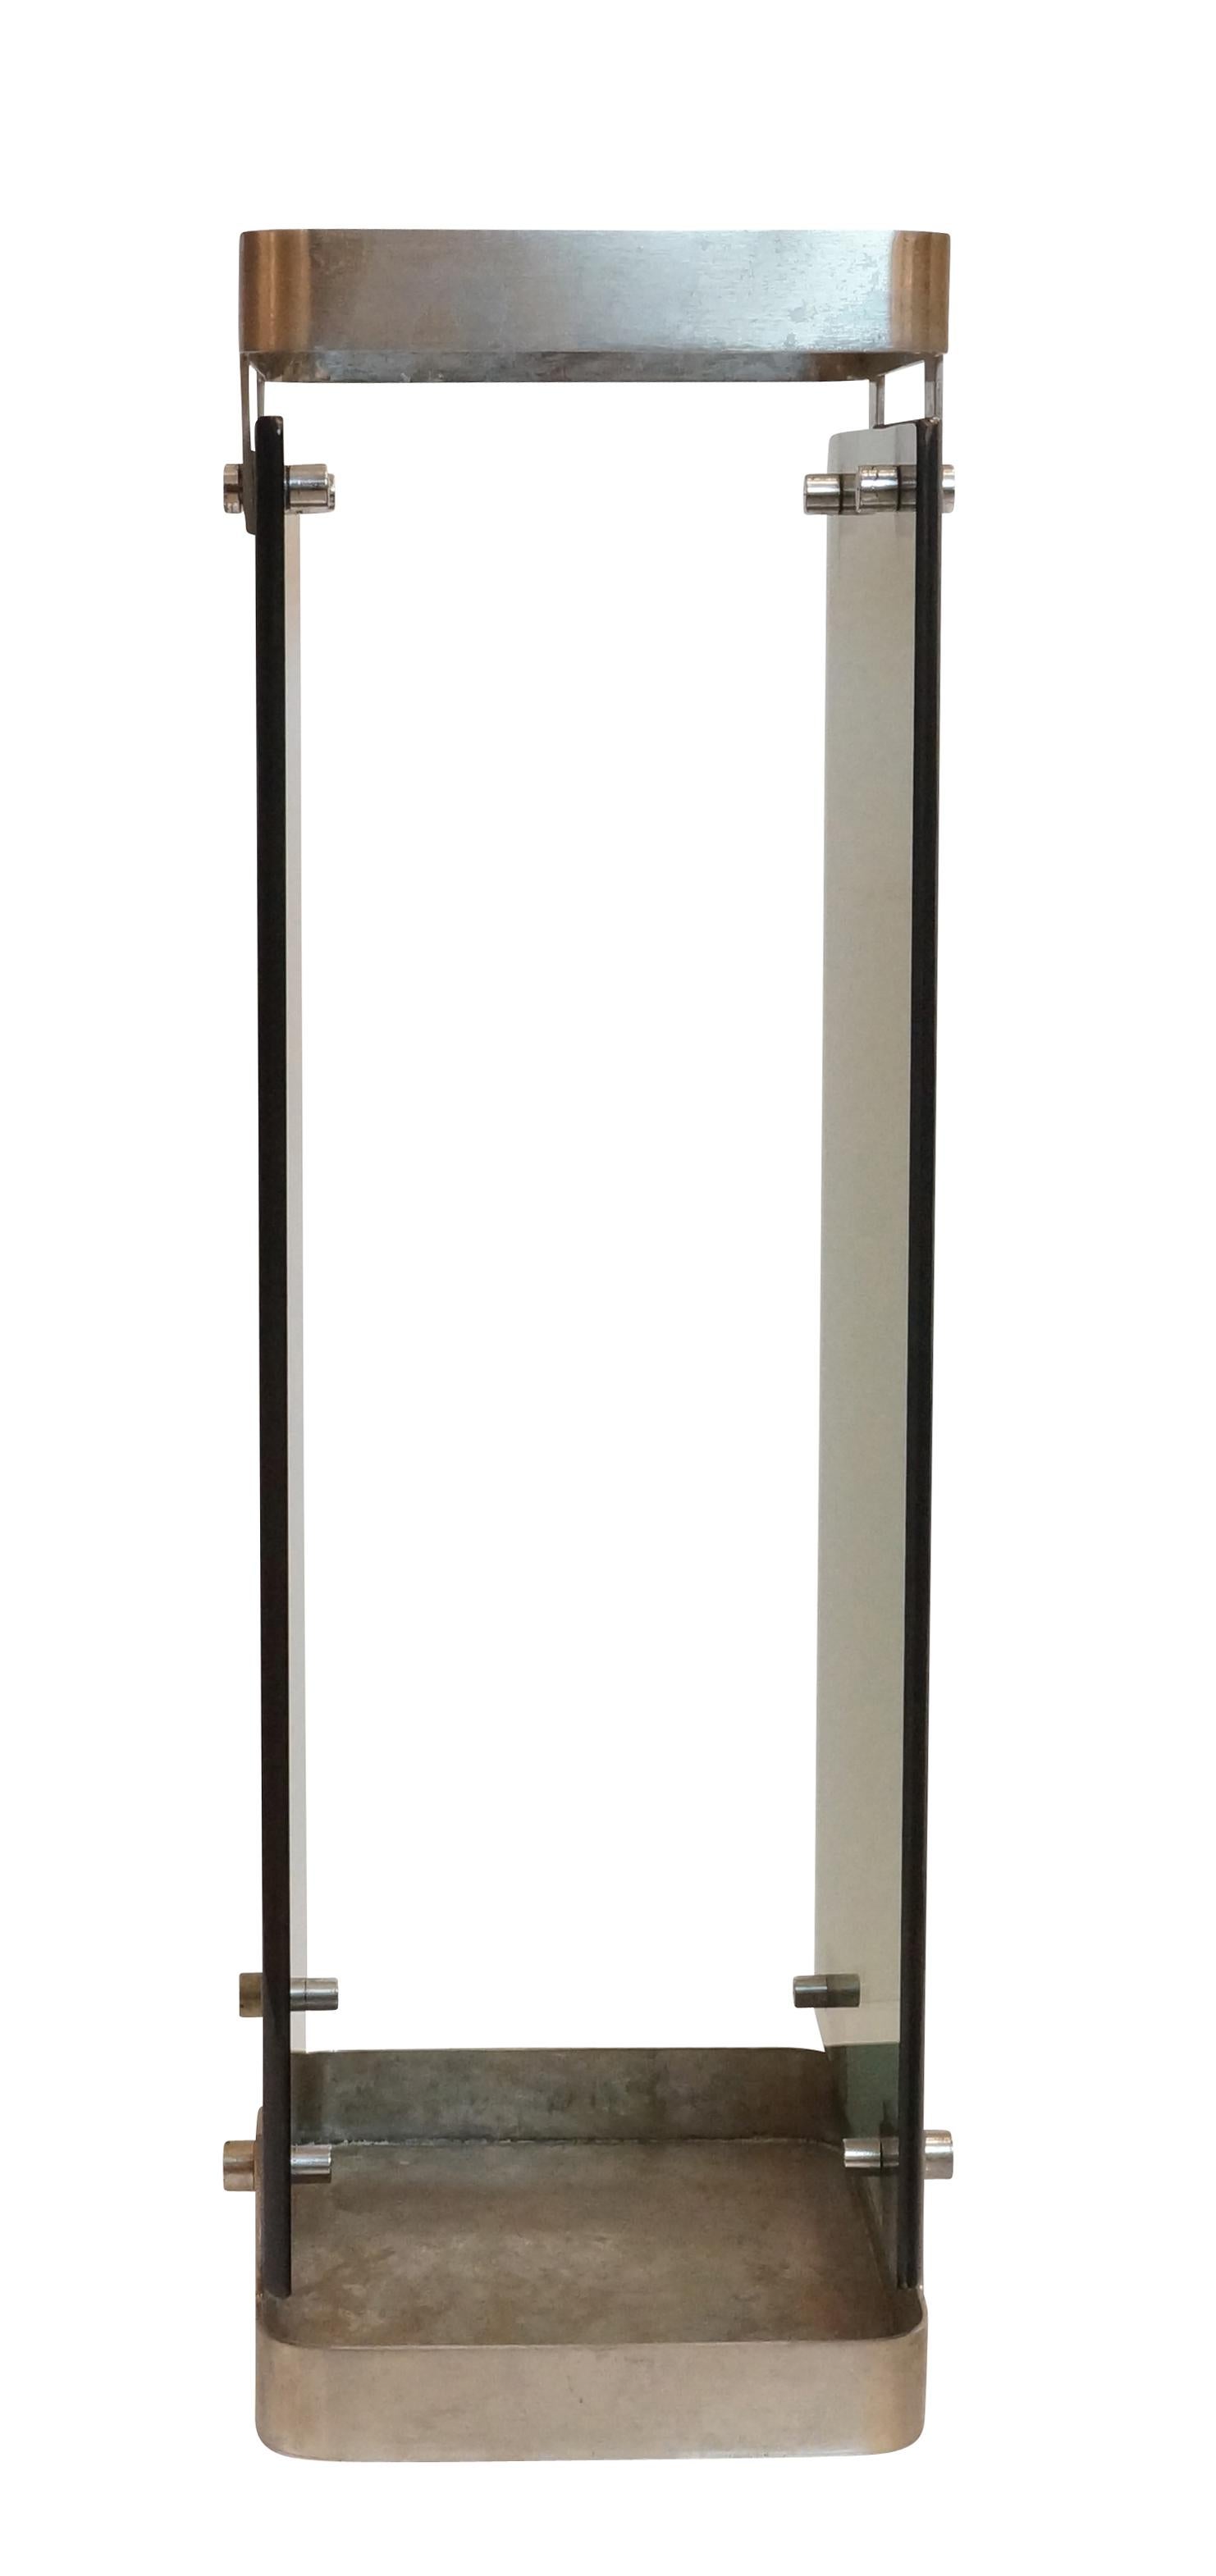 Fontana Arte Umbrella Stand with Satin Nickel Framing In Good Condition For Sale In New York, NY